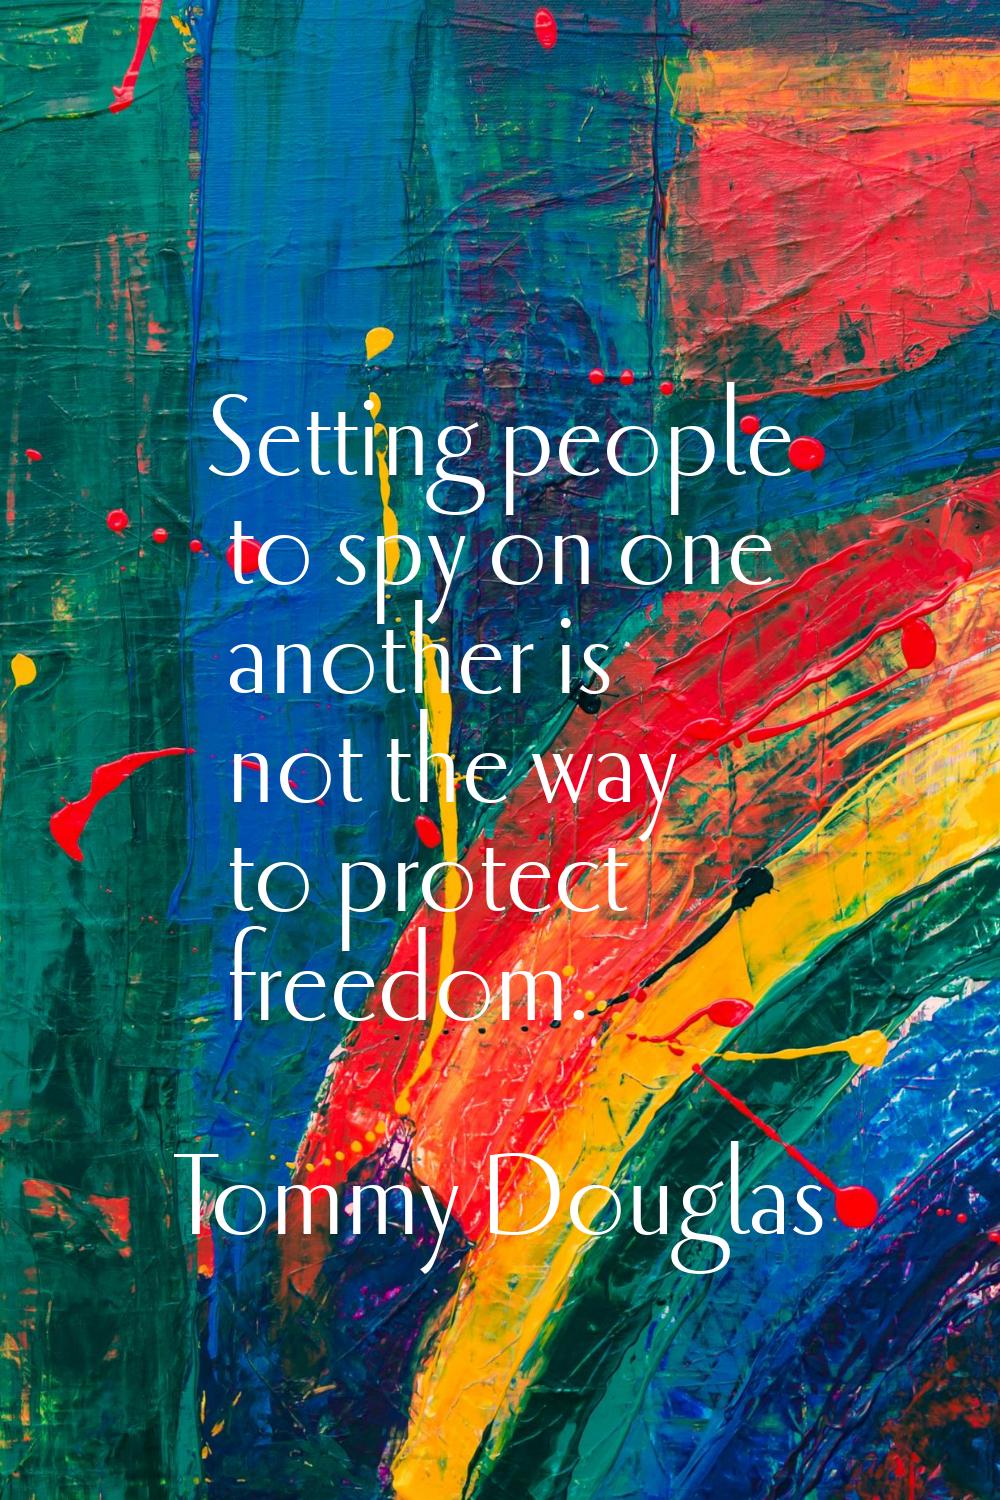 Setting people to spy on one another is not the way to protect freedom.